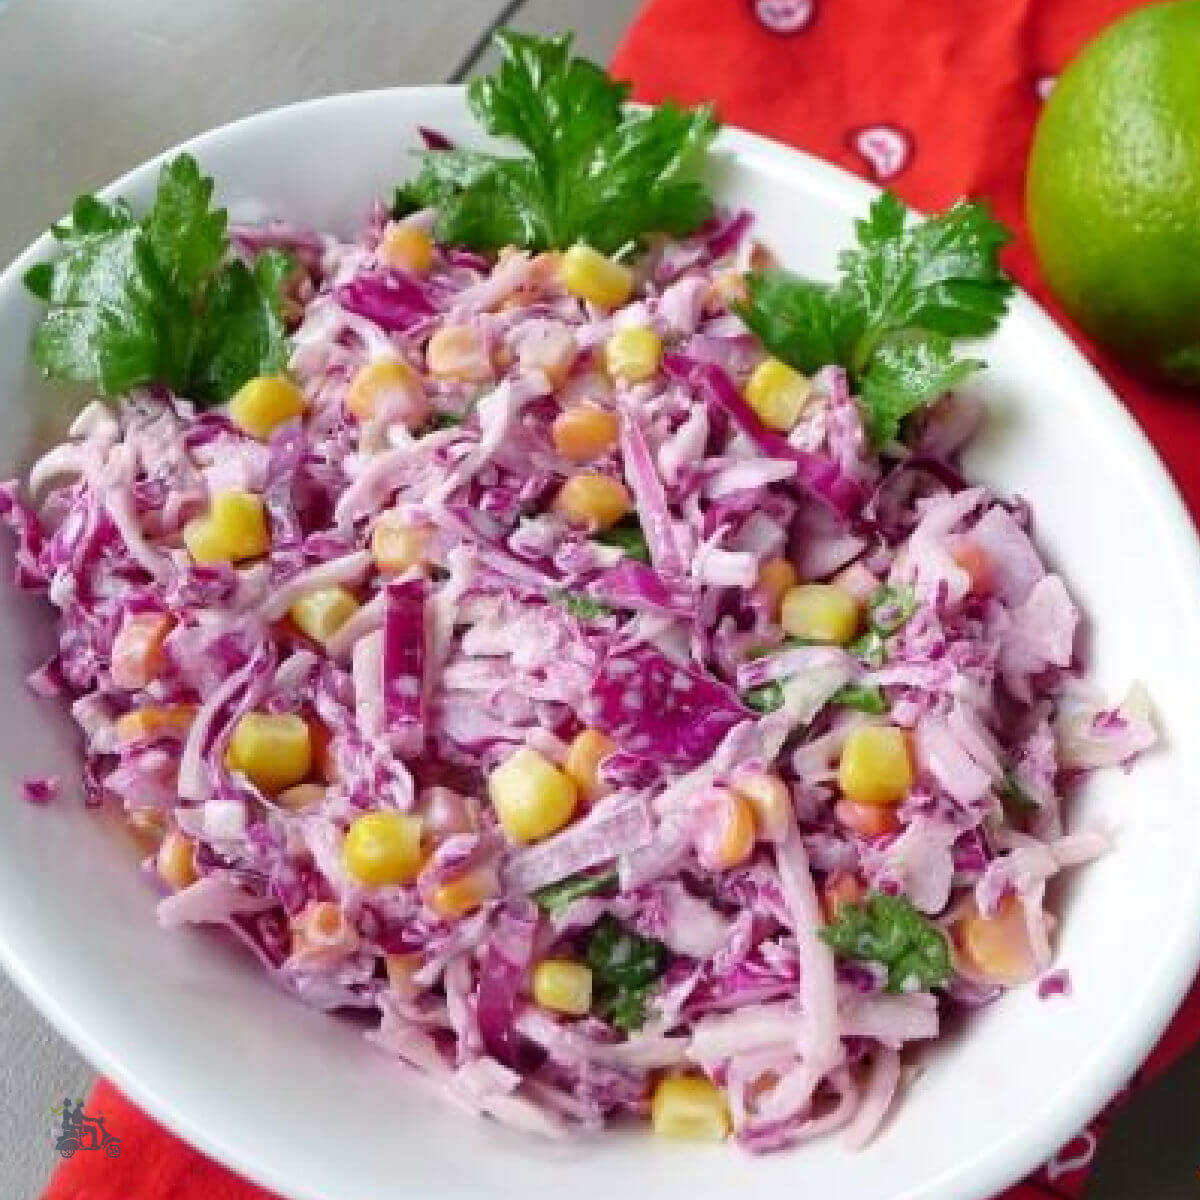 Spicy Southwestern Ranch Coleslaw With Adobo Sauce and Lime